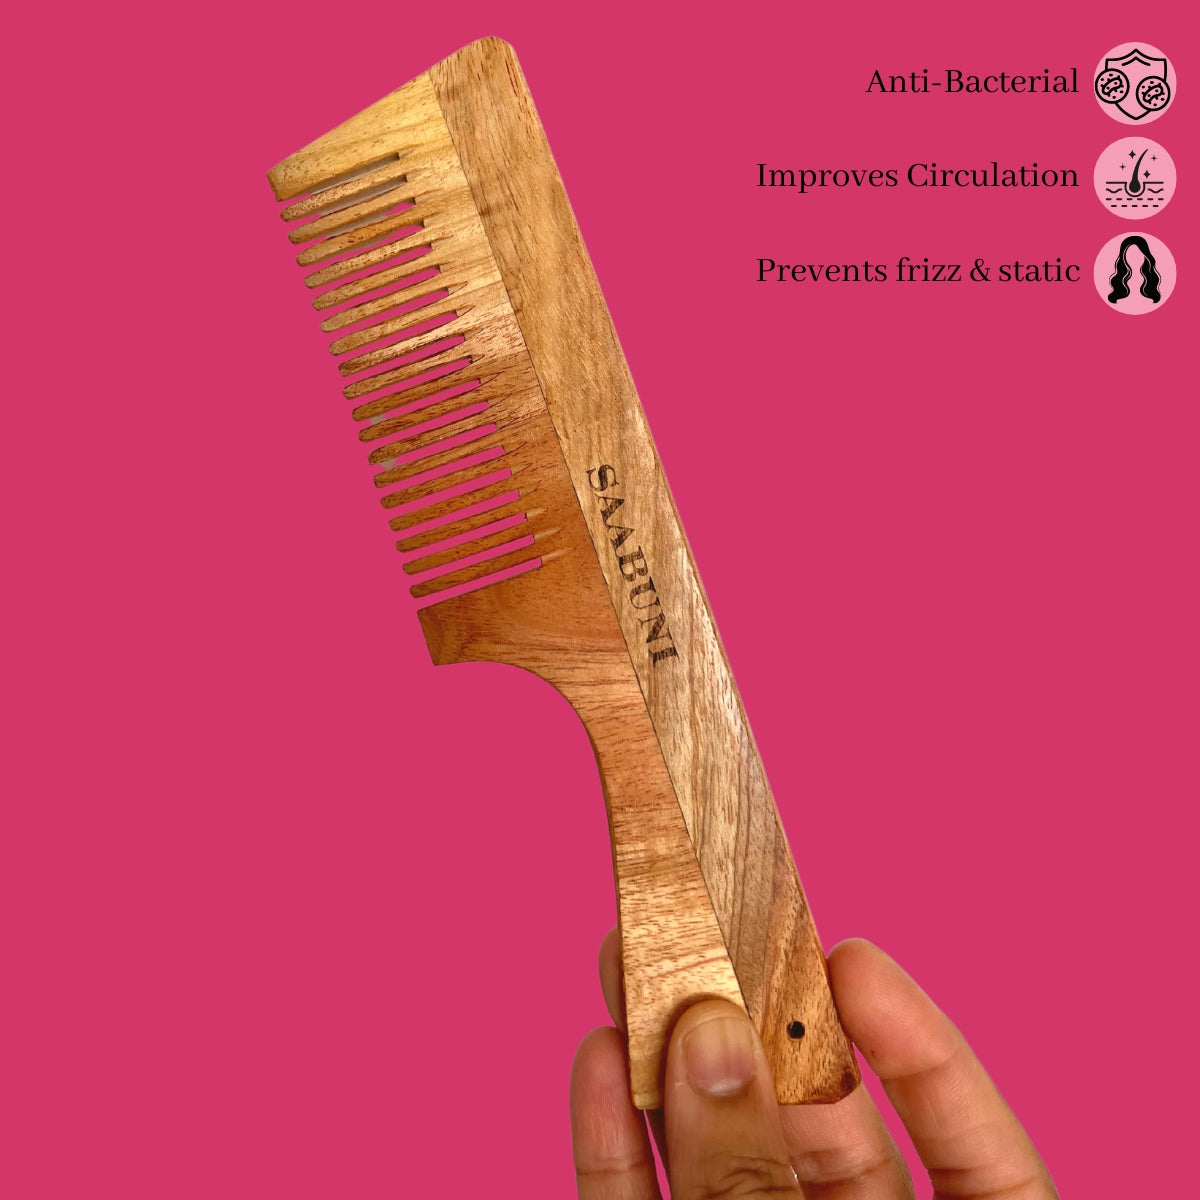 Neem Comb with anti bacterial properties. Prevents Frizz & Static